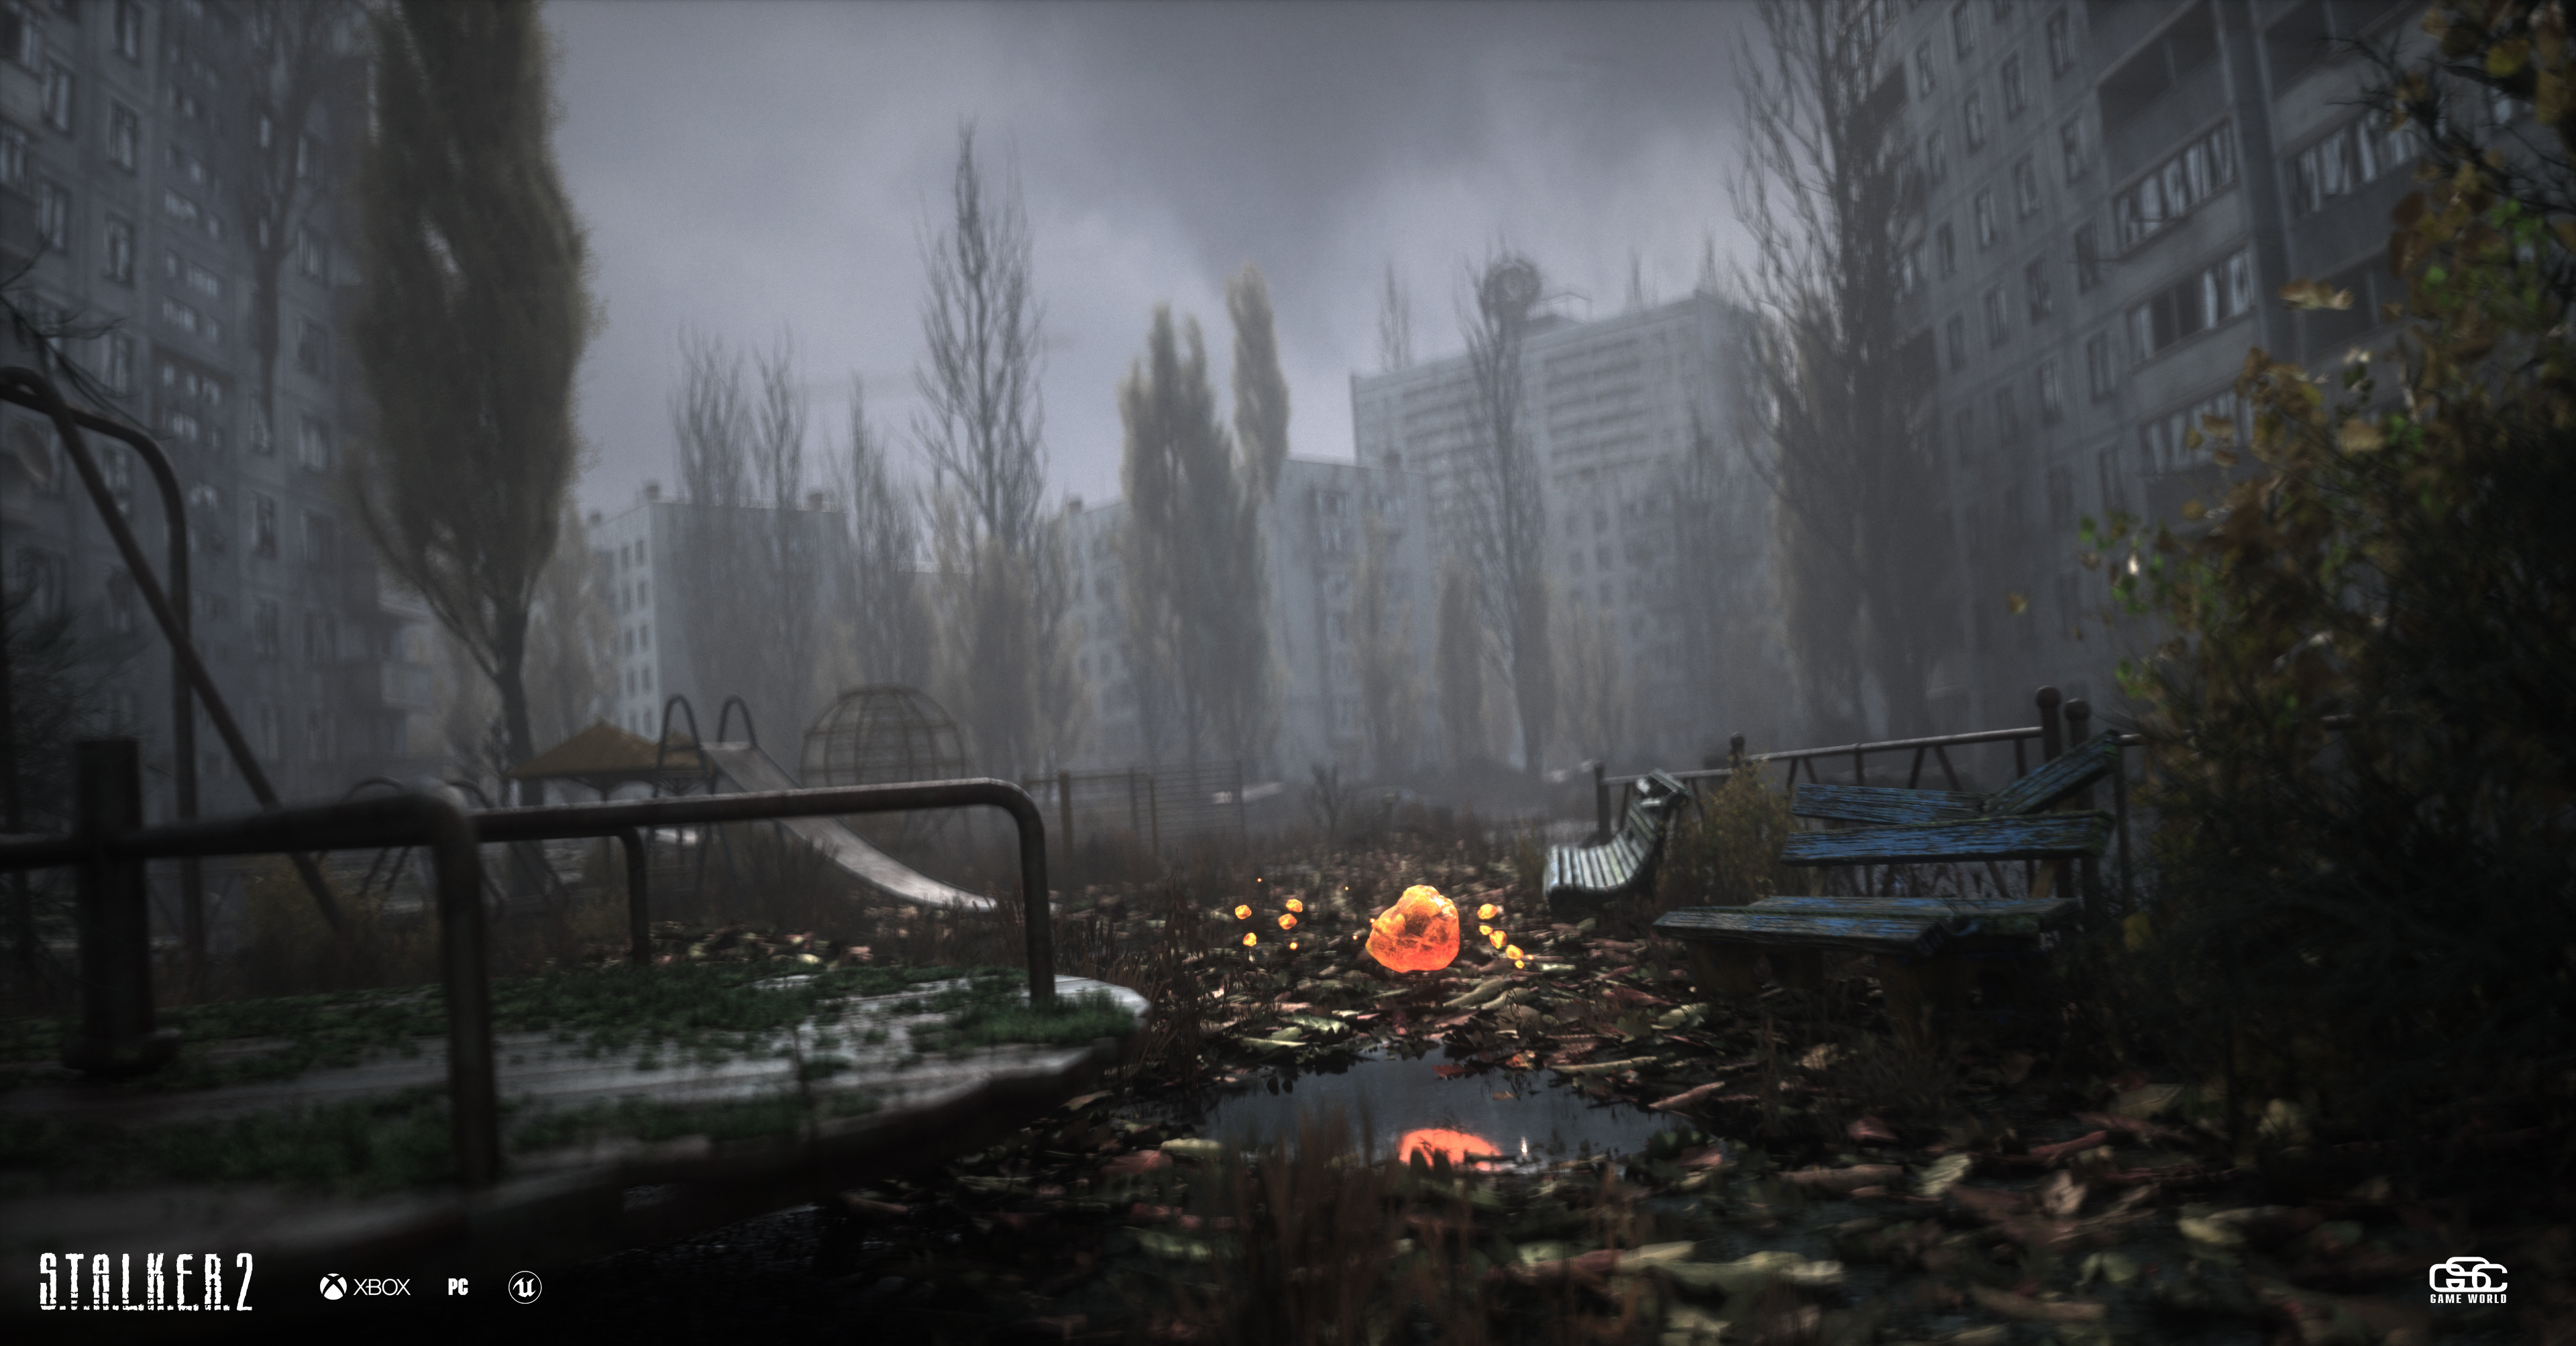 General 3840x2006 S.T.A.L.K.E.R. S.T.A.L.K.E.R.: Shadow of Chernobyl cinematic post apocalypse pine trees shooter S.T.A.L.K.E.R. 2 digital art watermarked video games logo